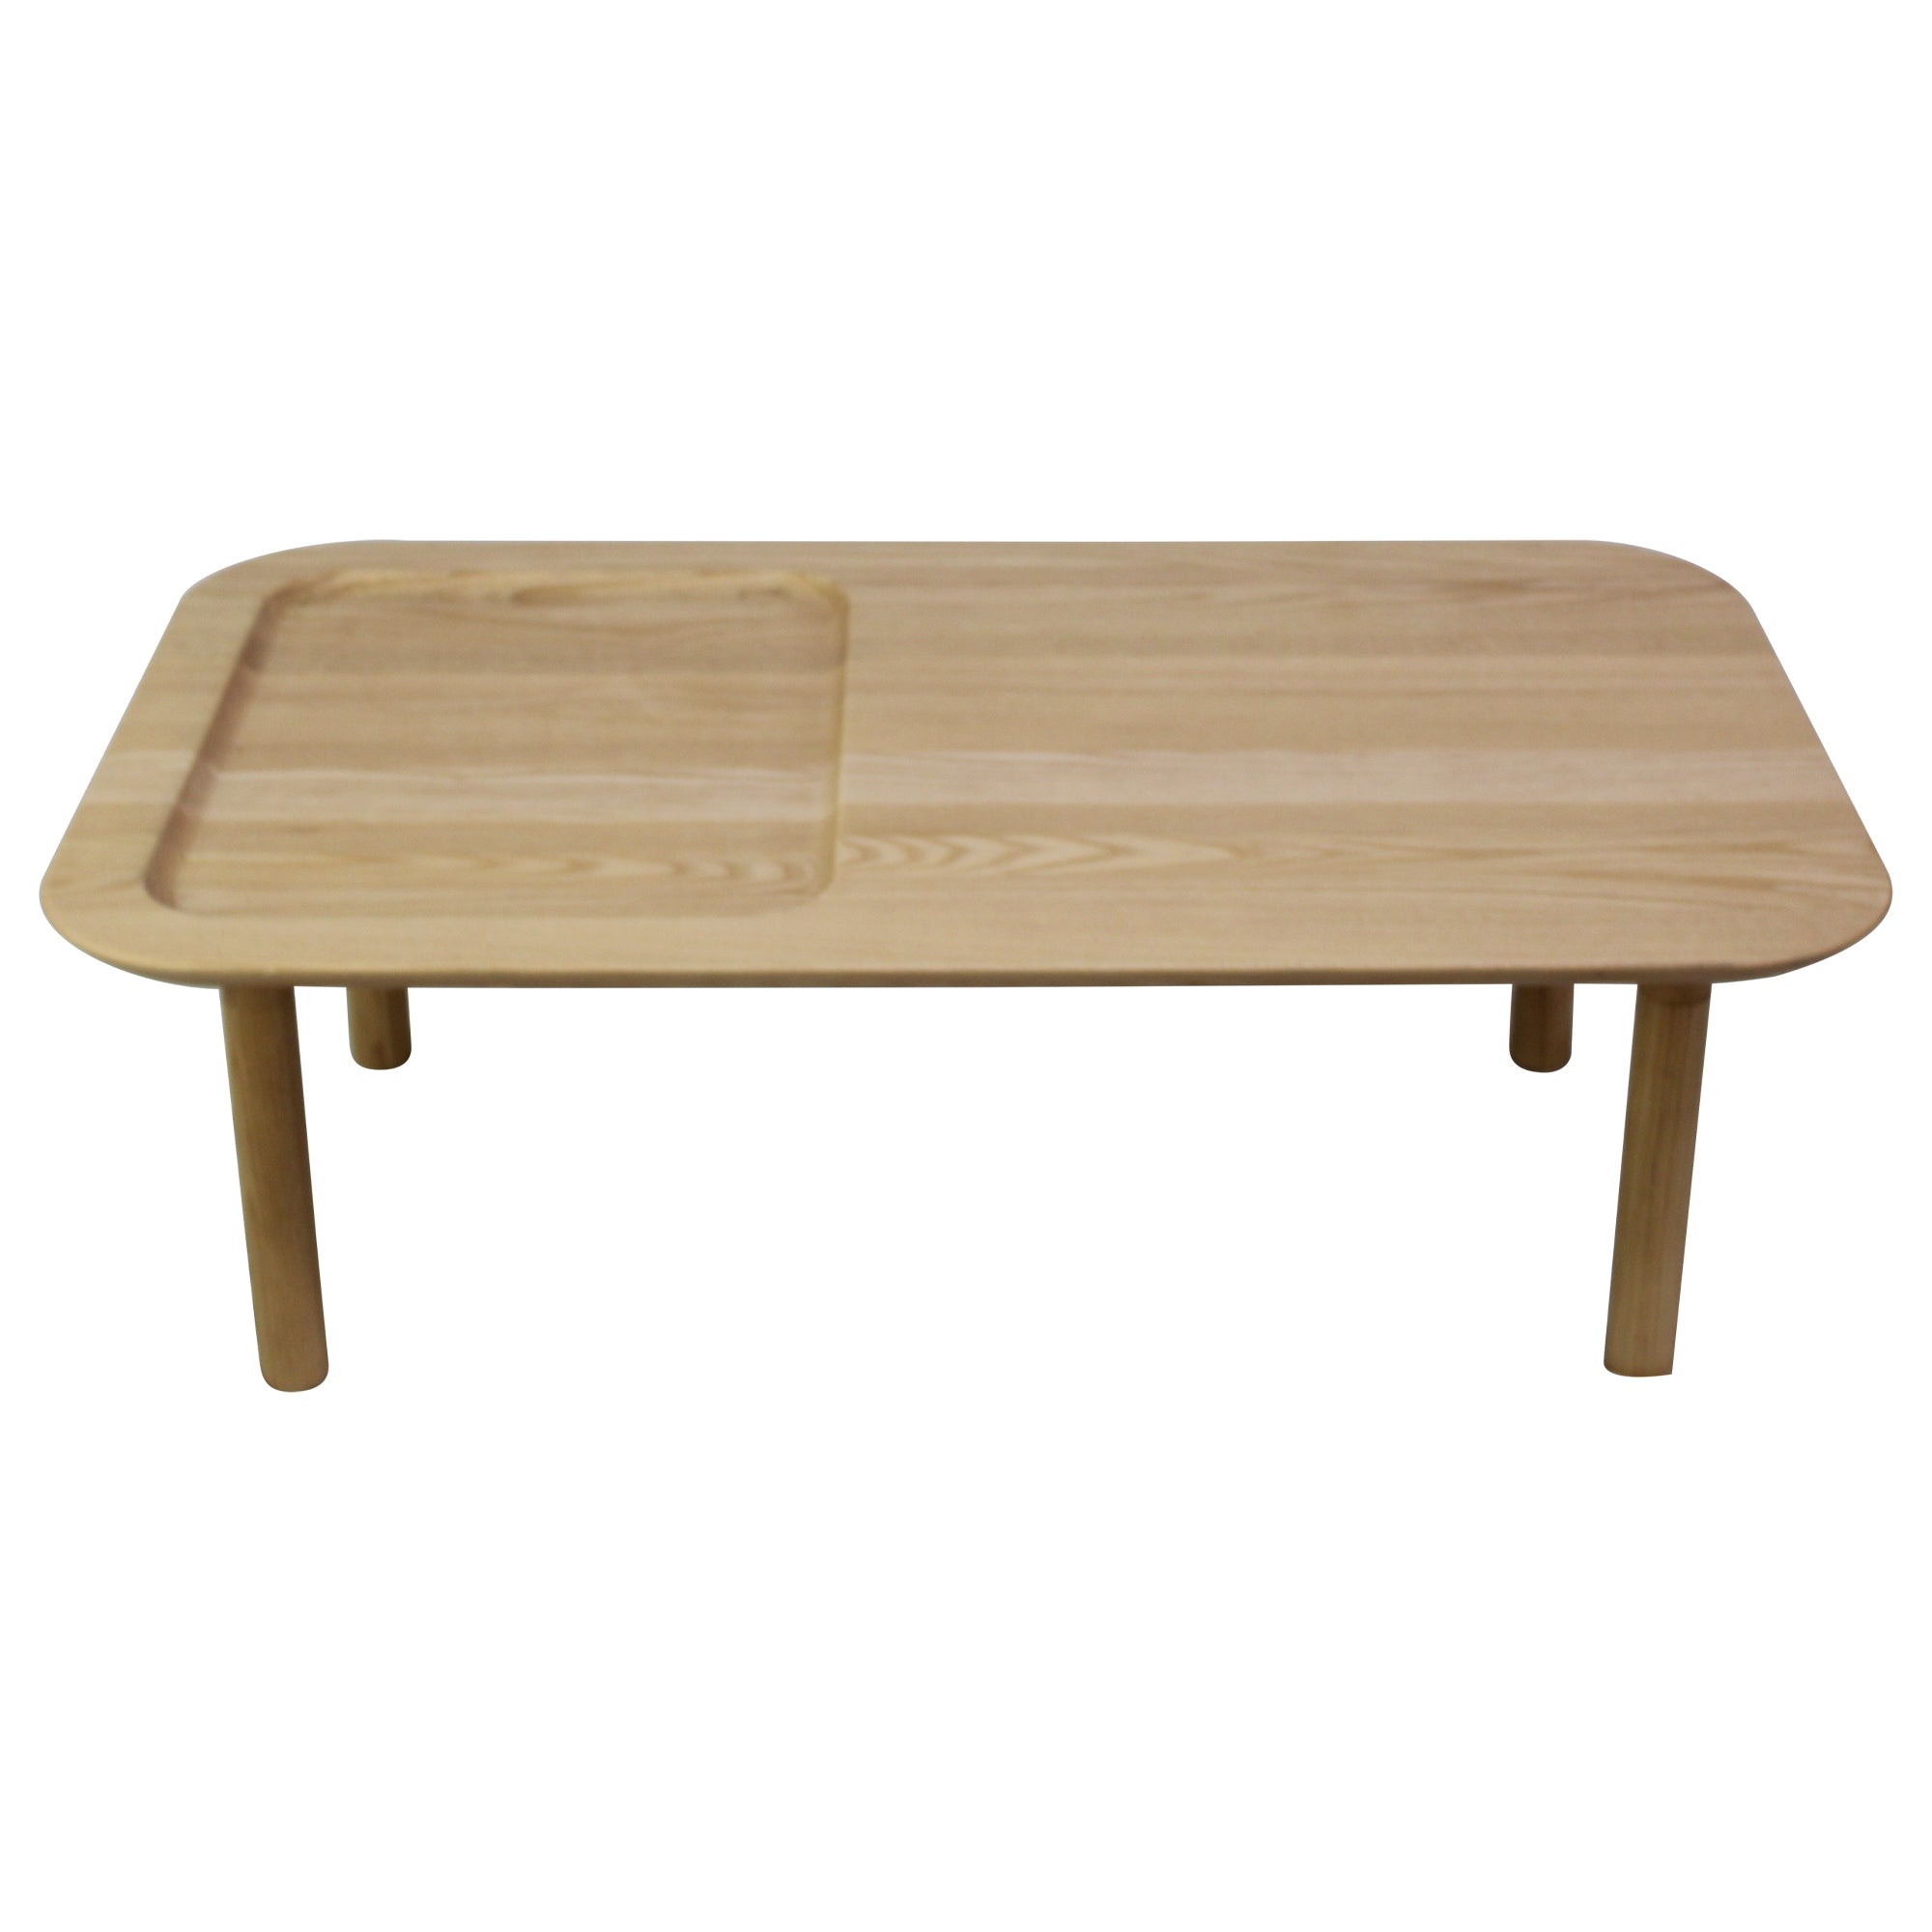 Poppin Natural Ash Coffee Table - Preowned